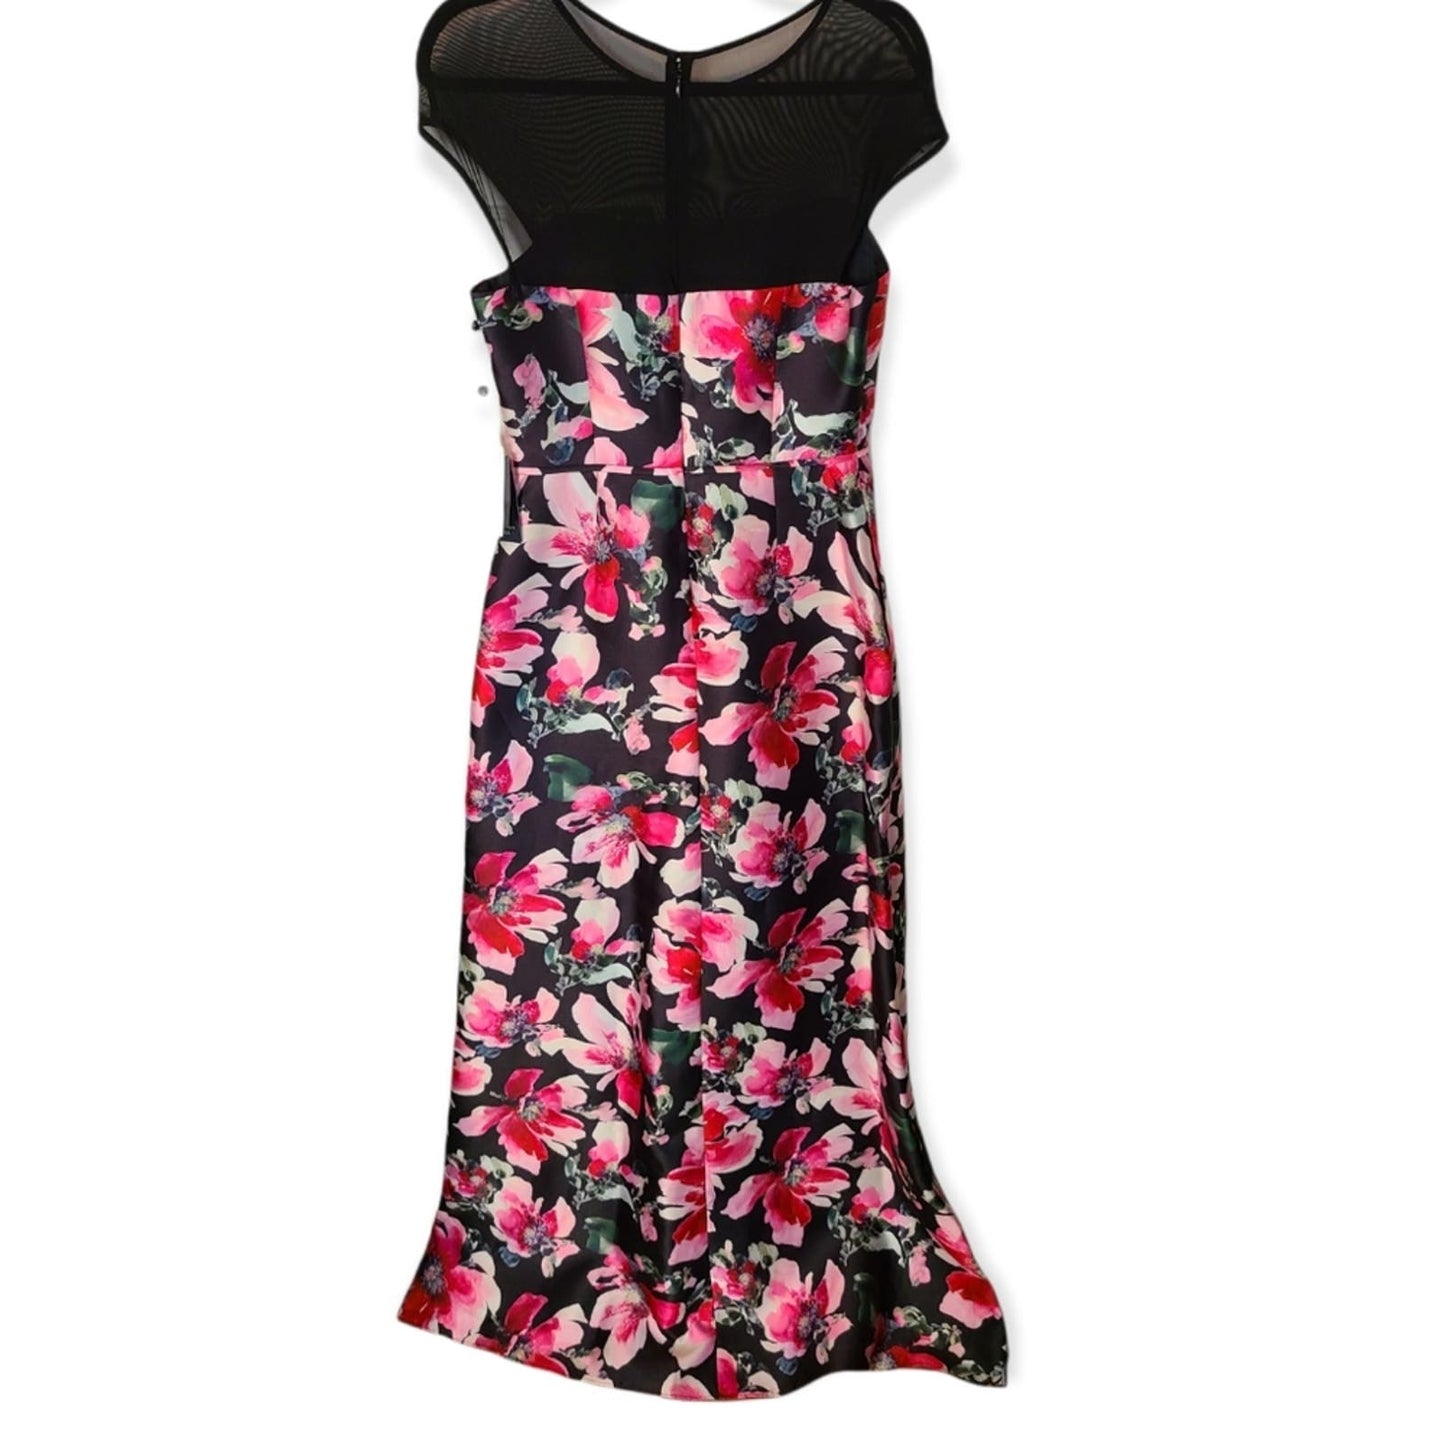 Adrianna Papell Sheer Neckline Pink and Black Floral Mikado Evening Gown